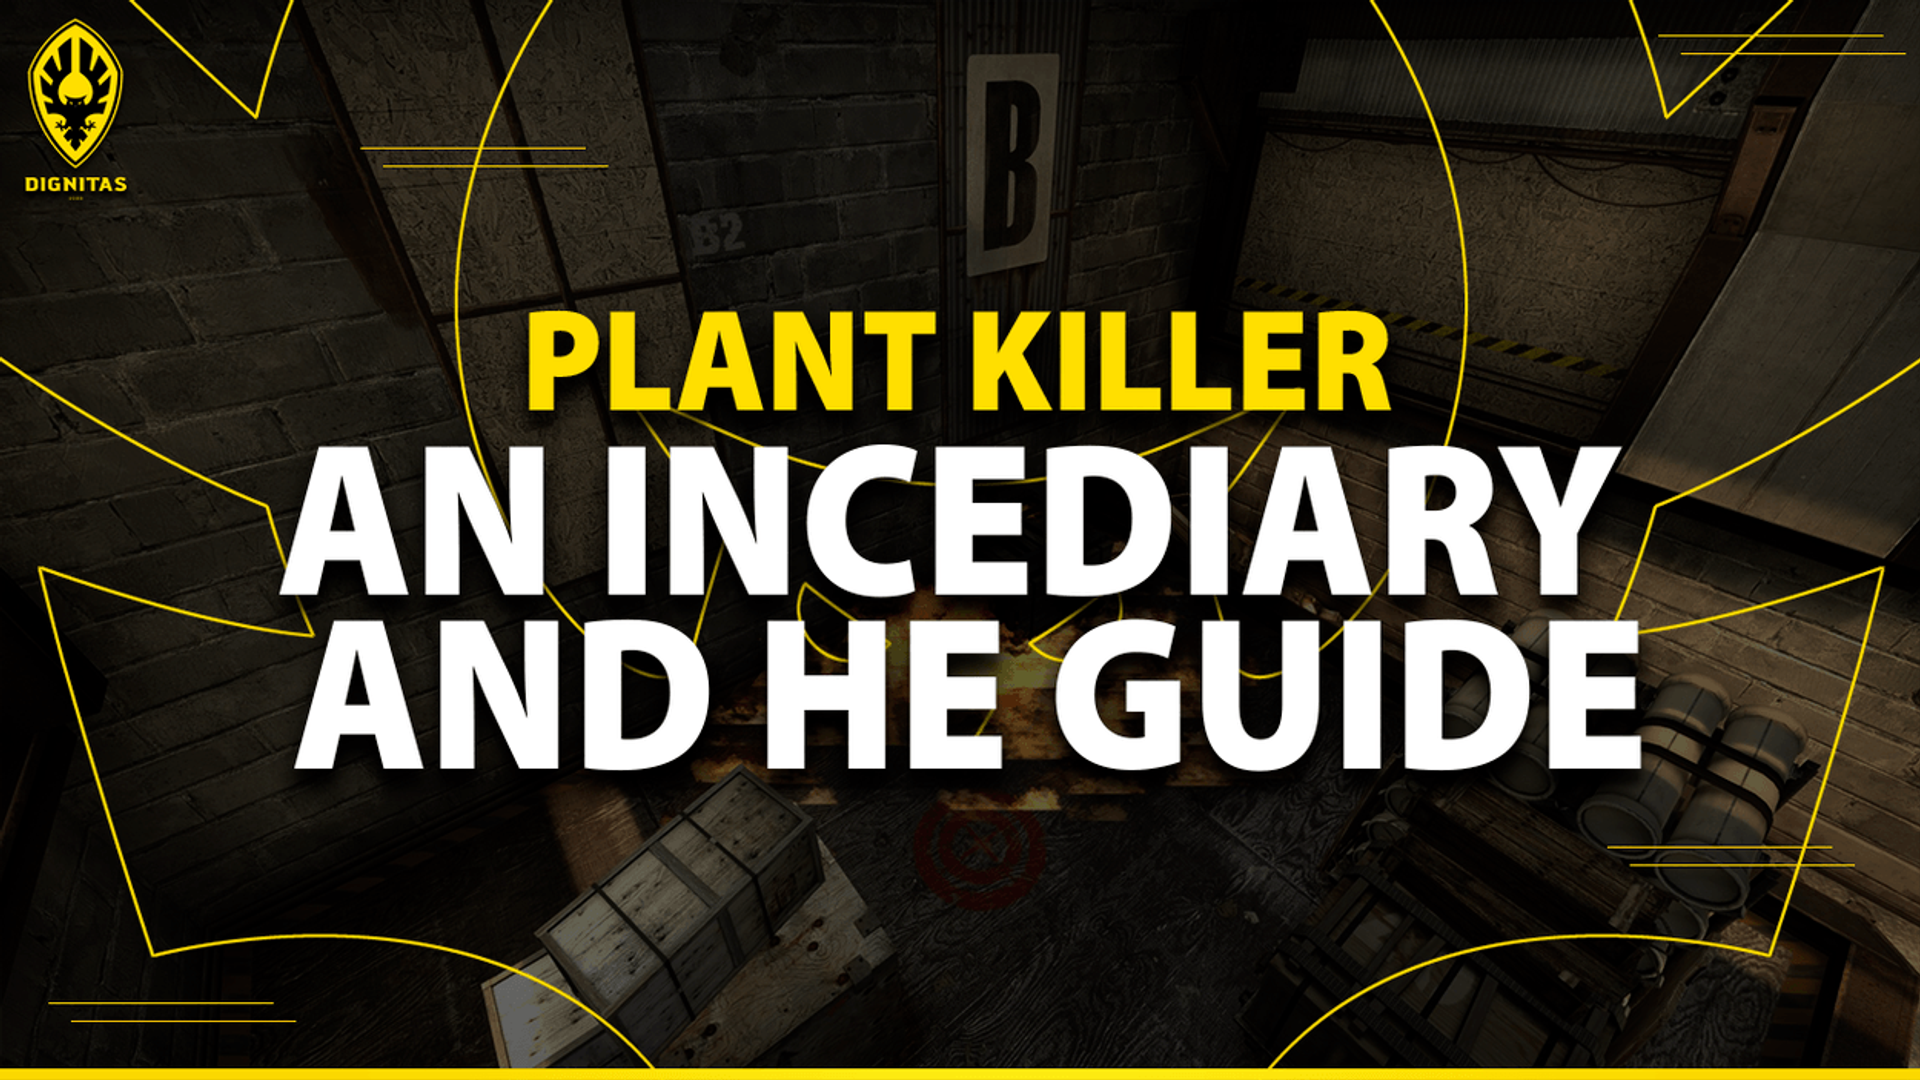 Plant Killers - An Incendiary and HE Guide